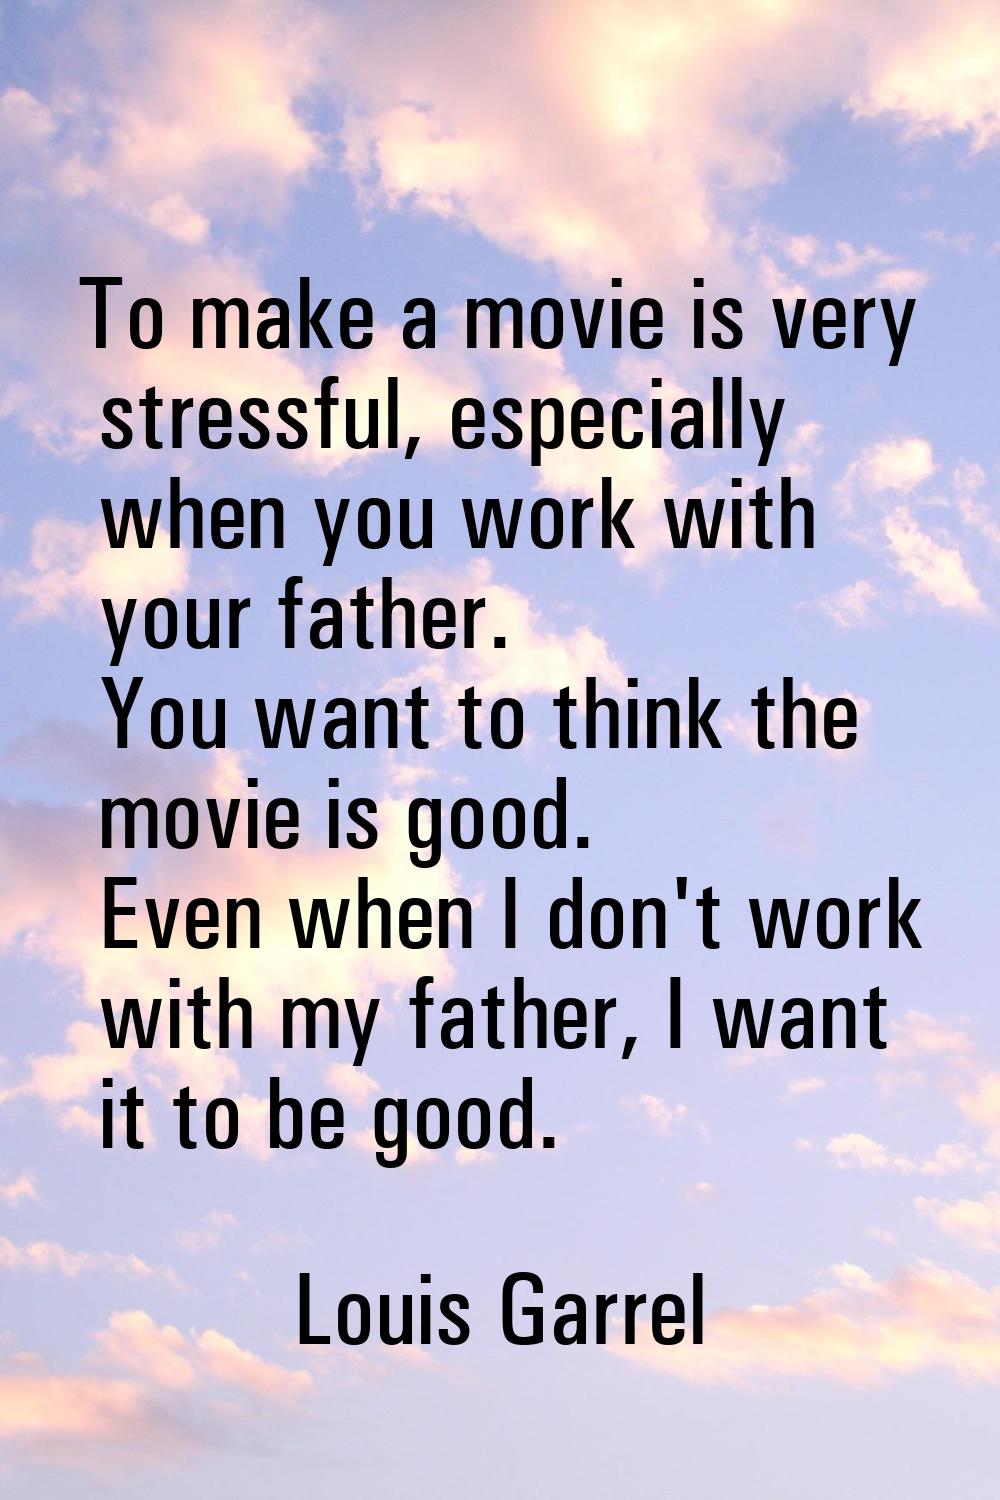 To make a movie is very stressful, especially when you work with your father. You want to think the